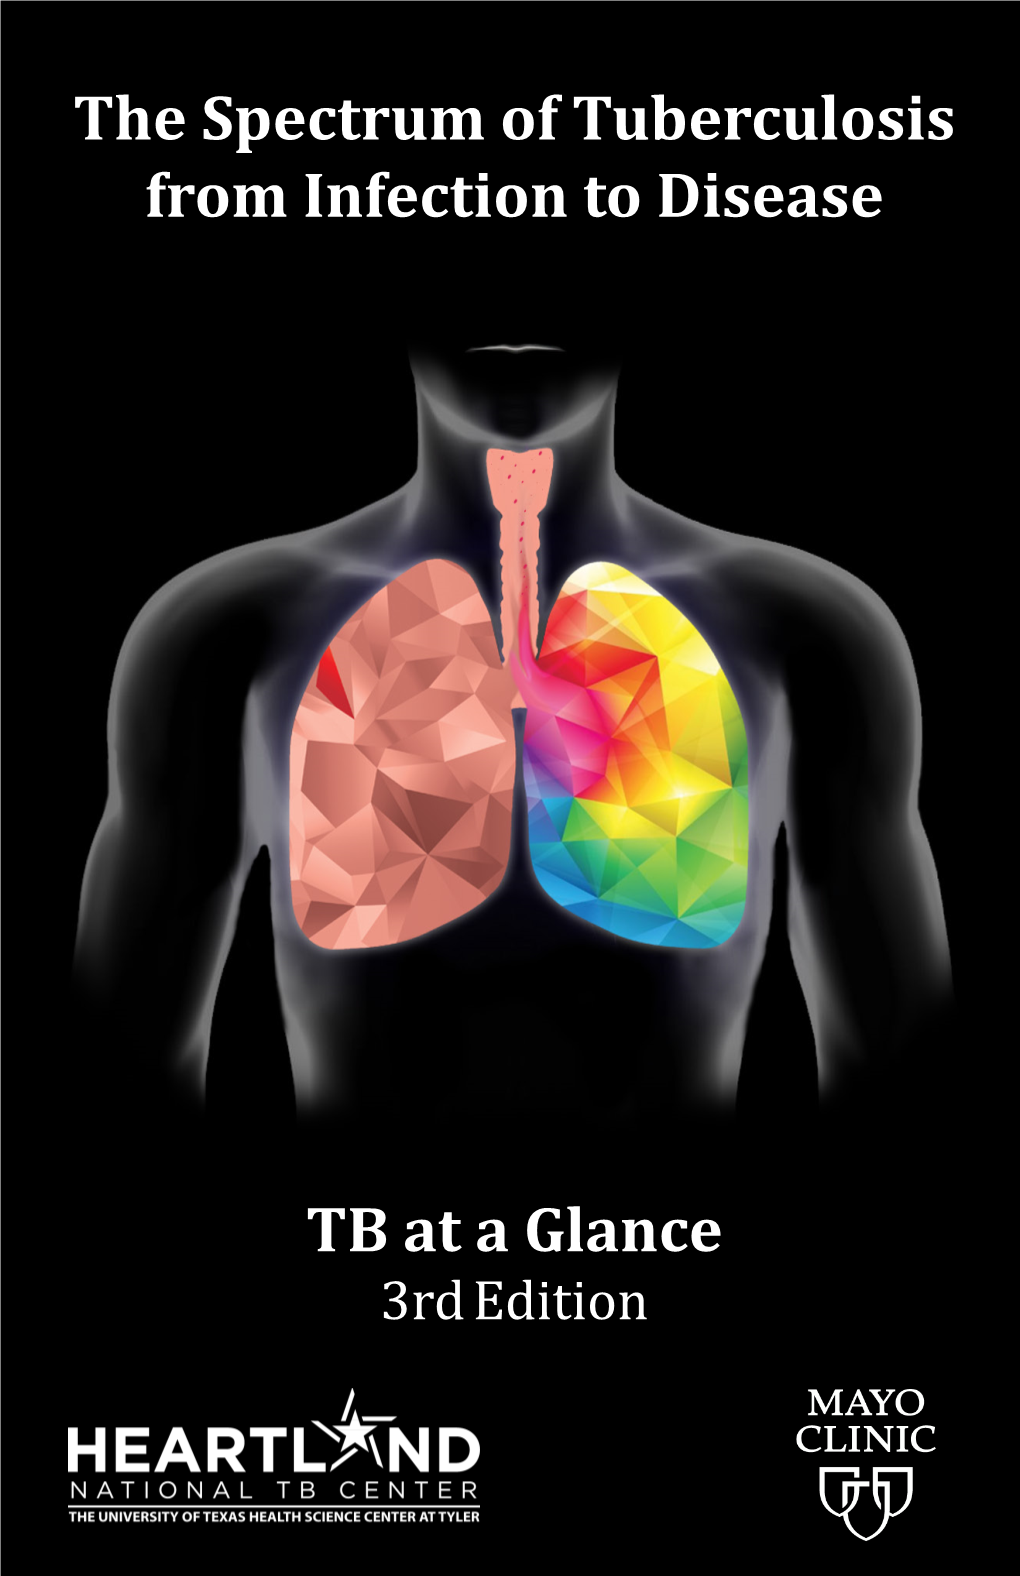 The Spectrum of Tuberculosis from Infection to Disease